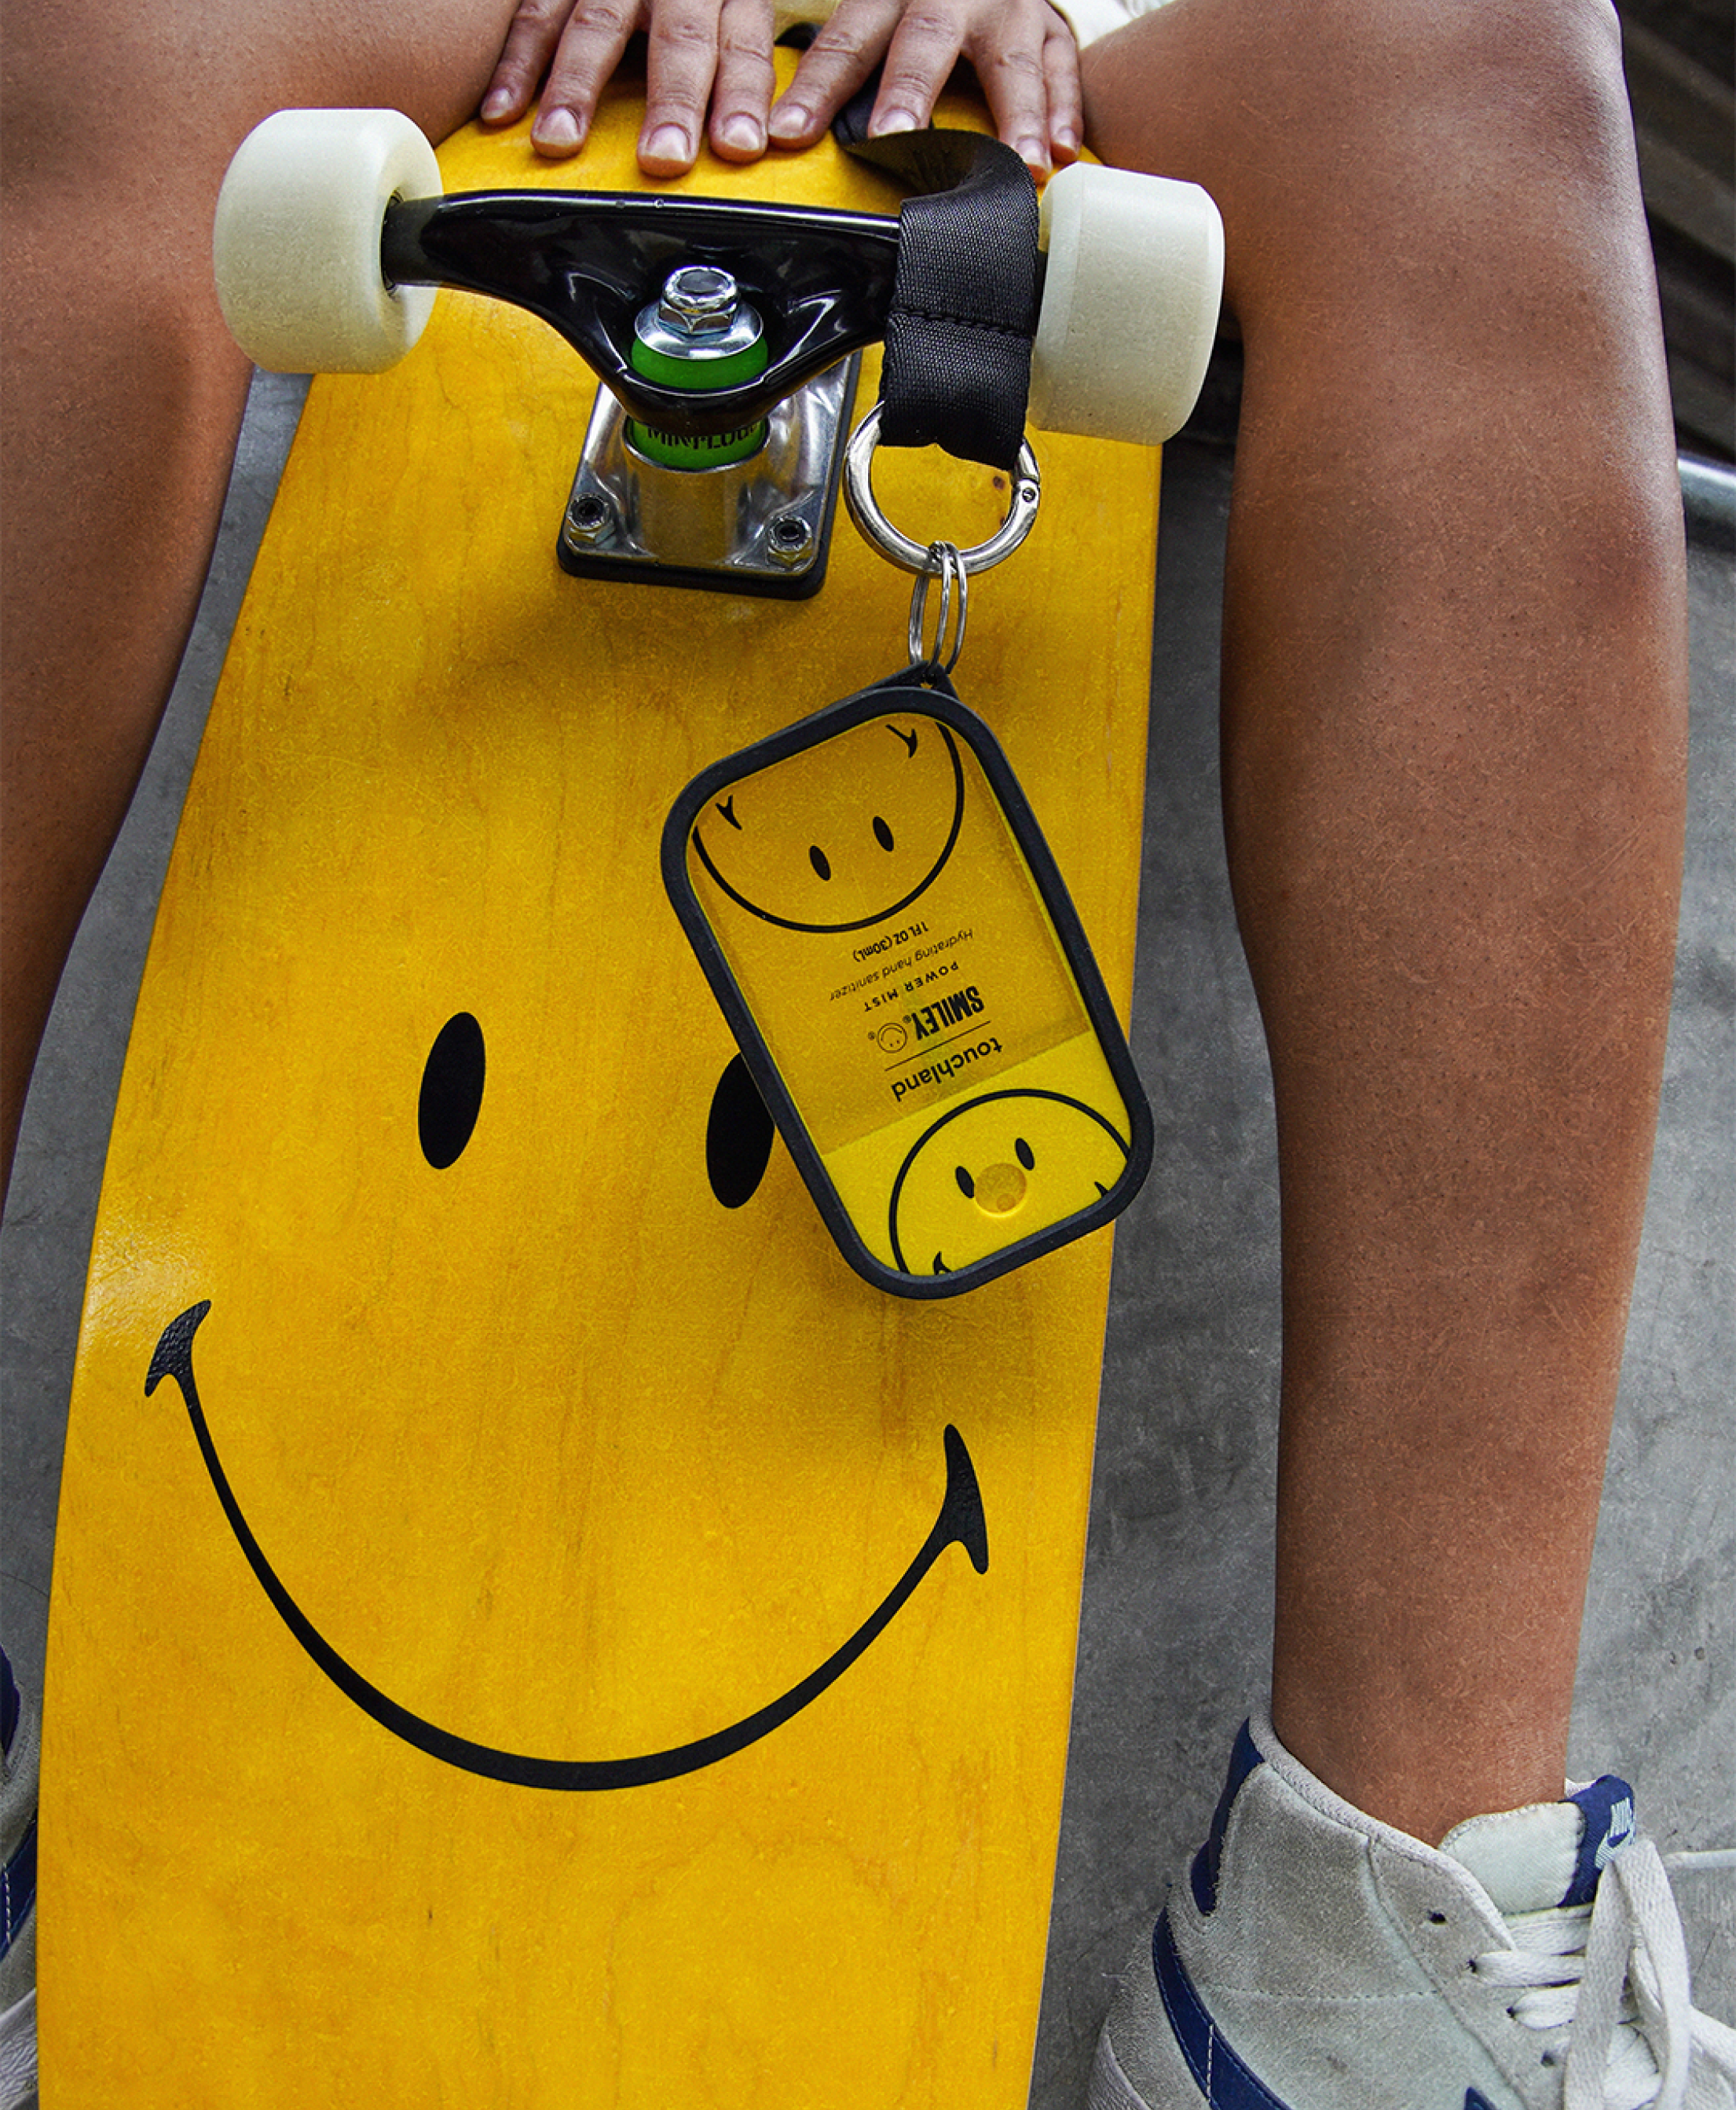 The Smiley Beach Coco Power Mist hanging from a Lanyard on a skateboard.